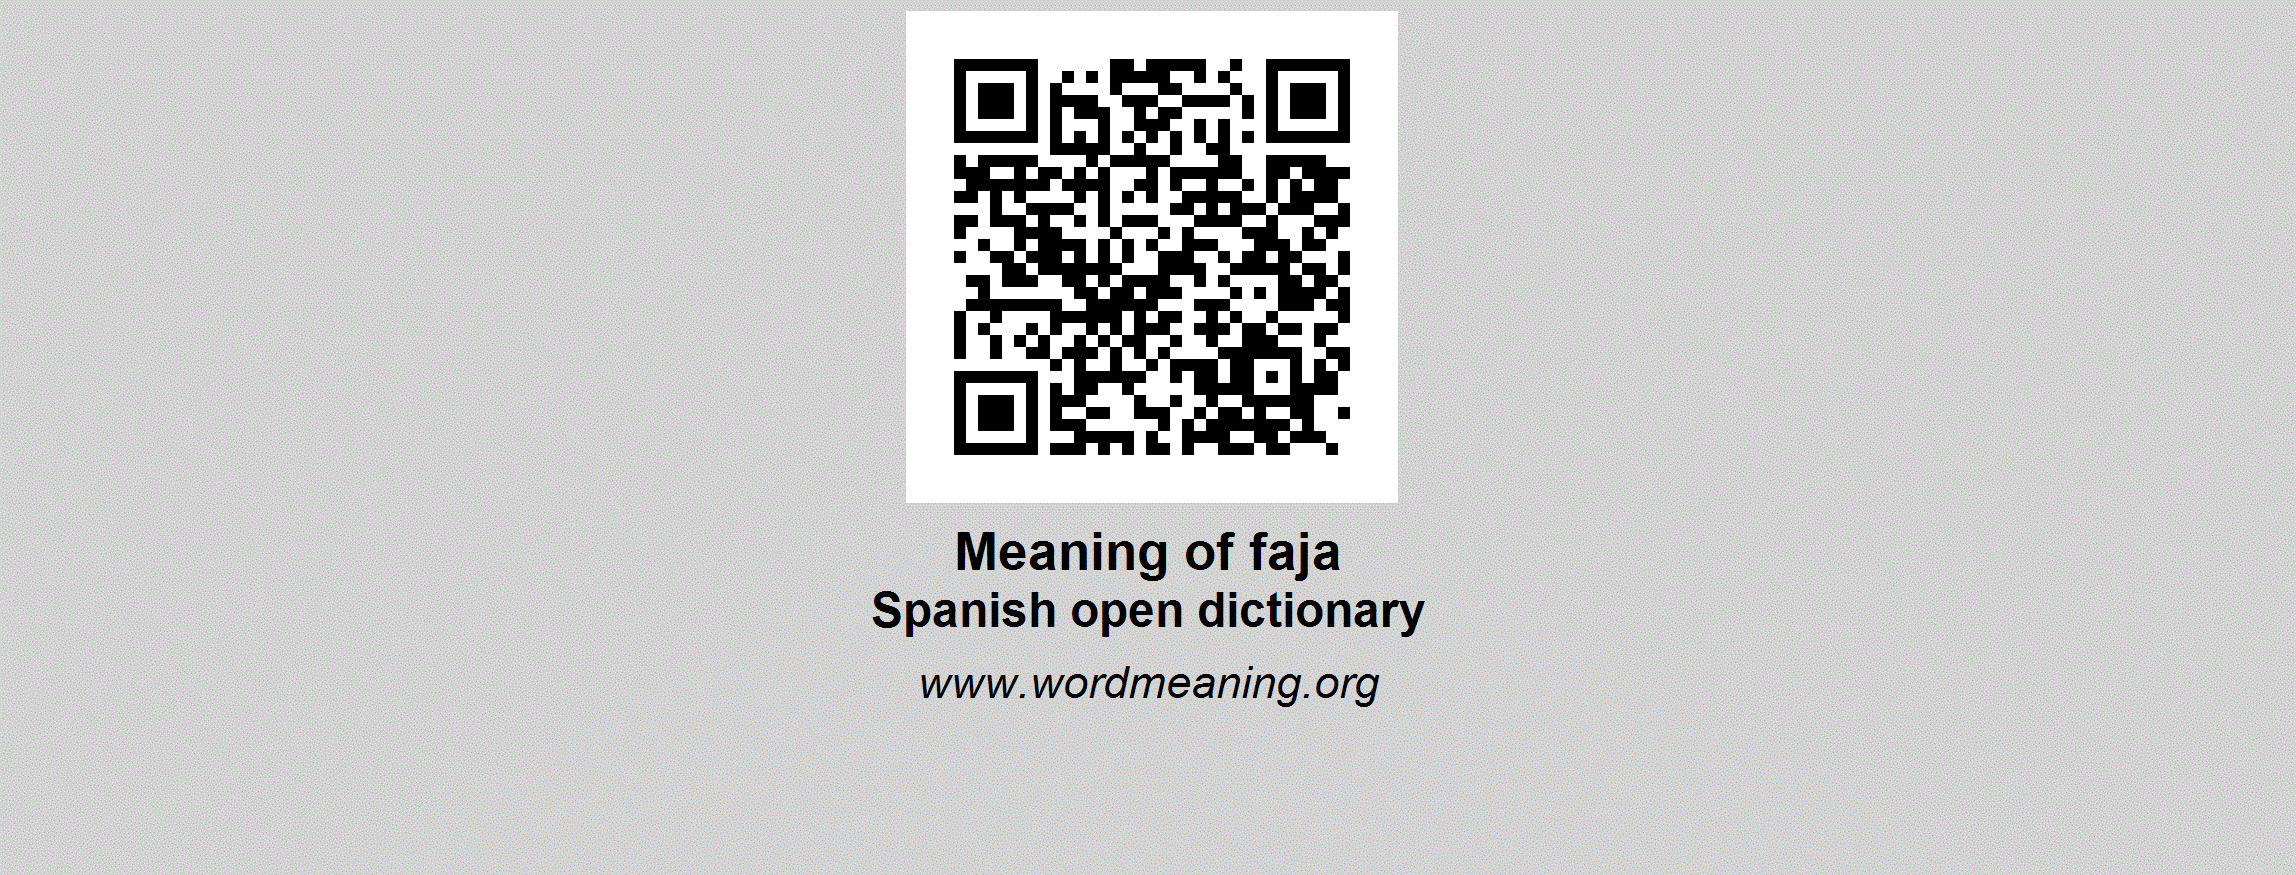 https://images.wordmeaning.org/spanish/definition/grande/faja.gif